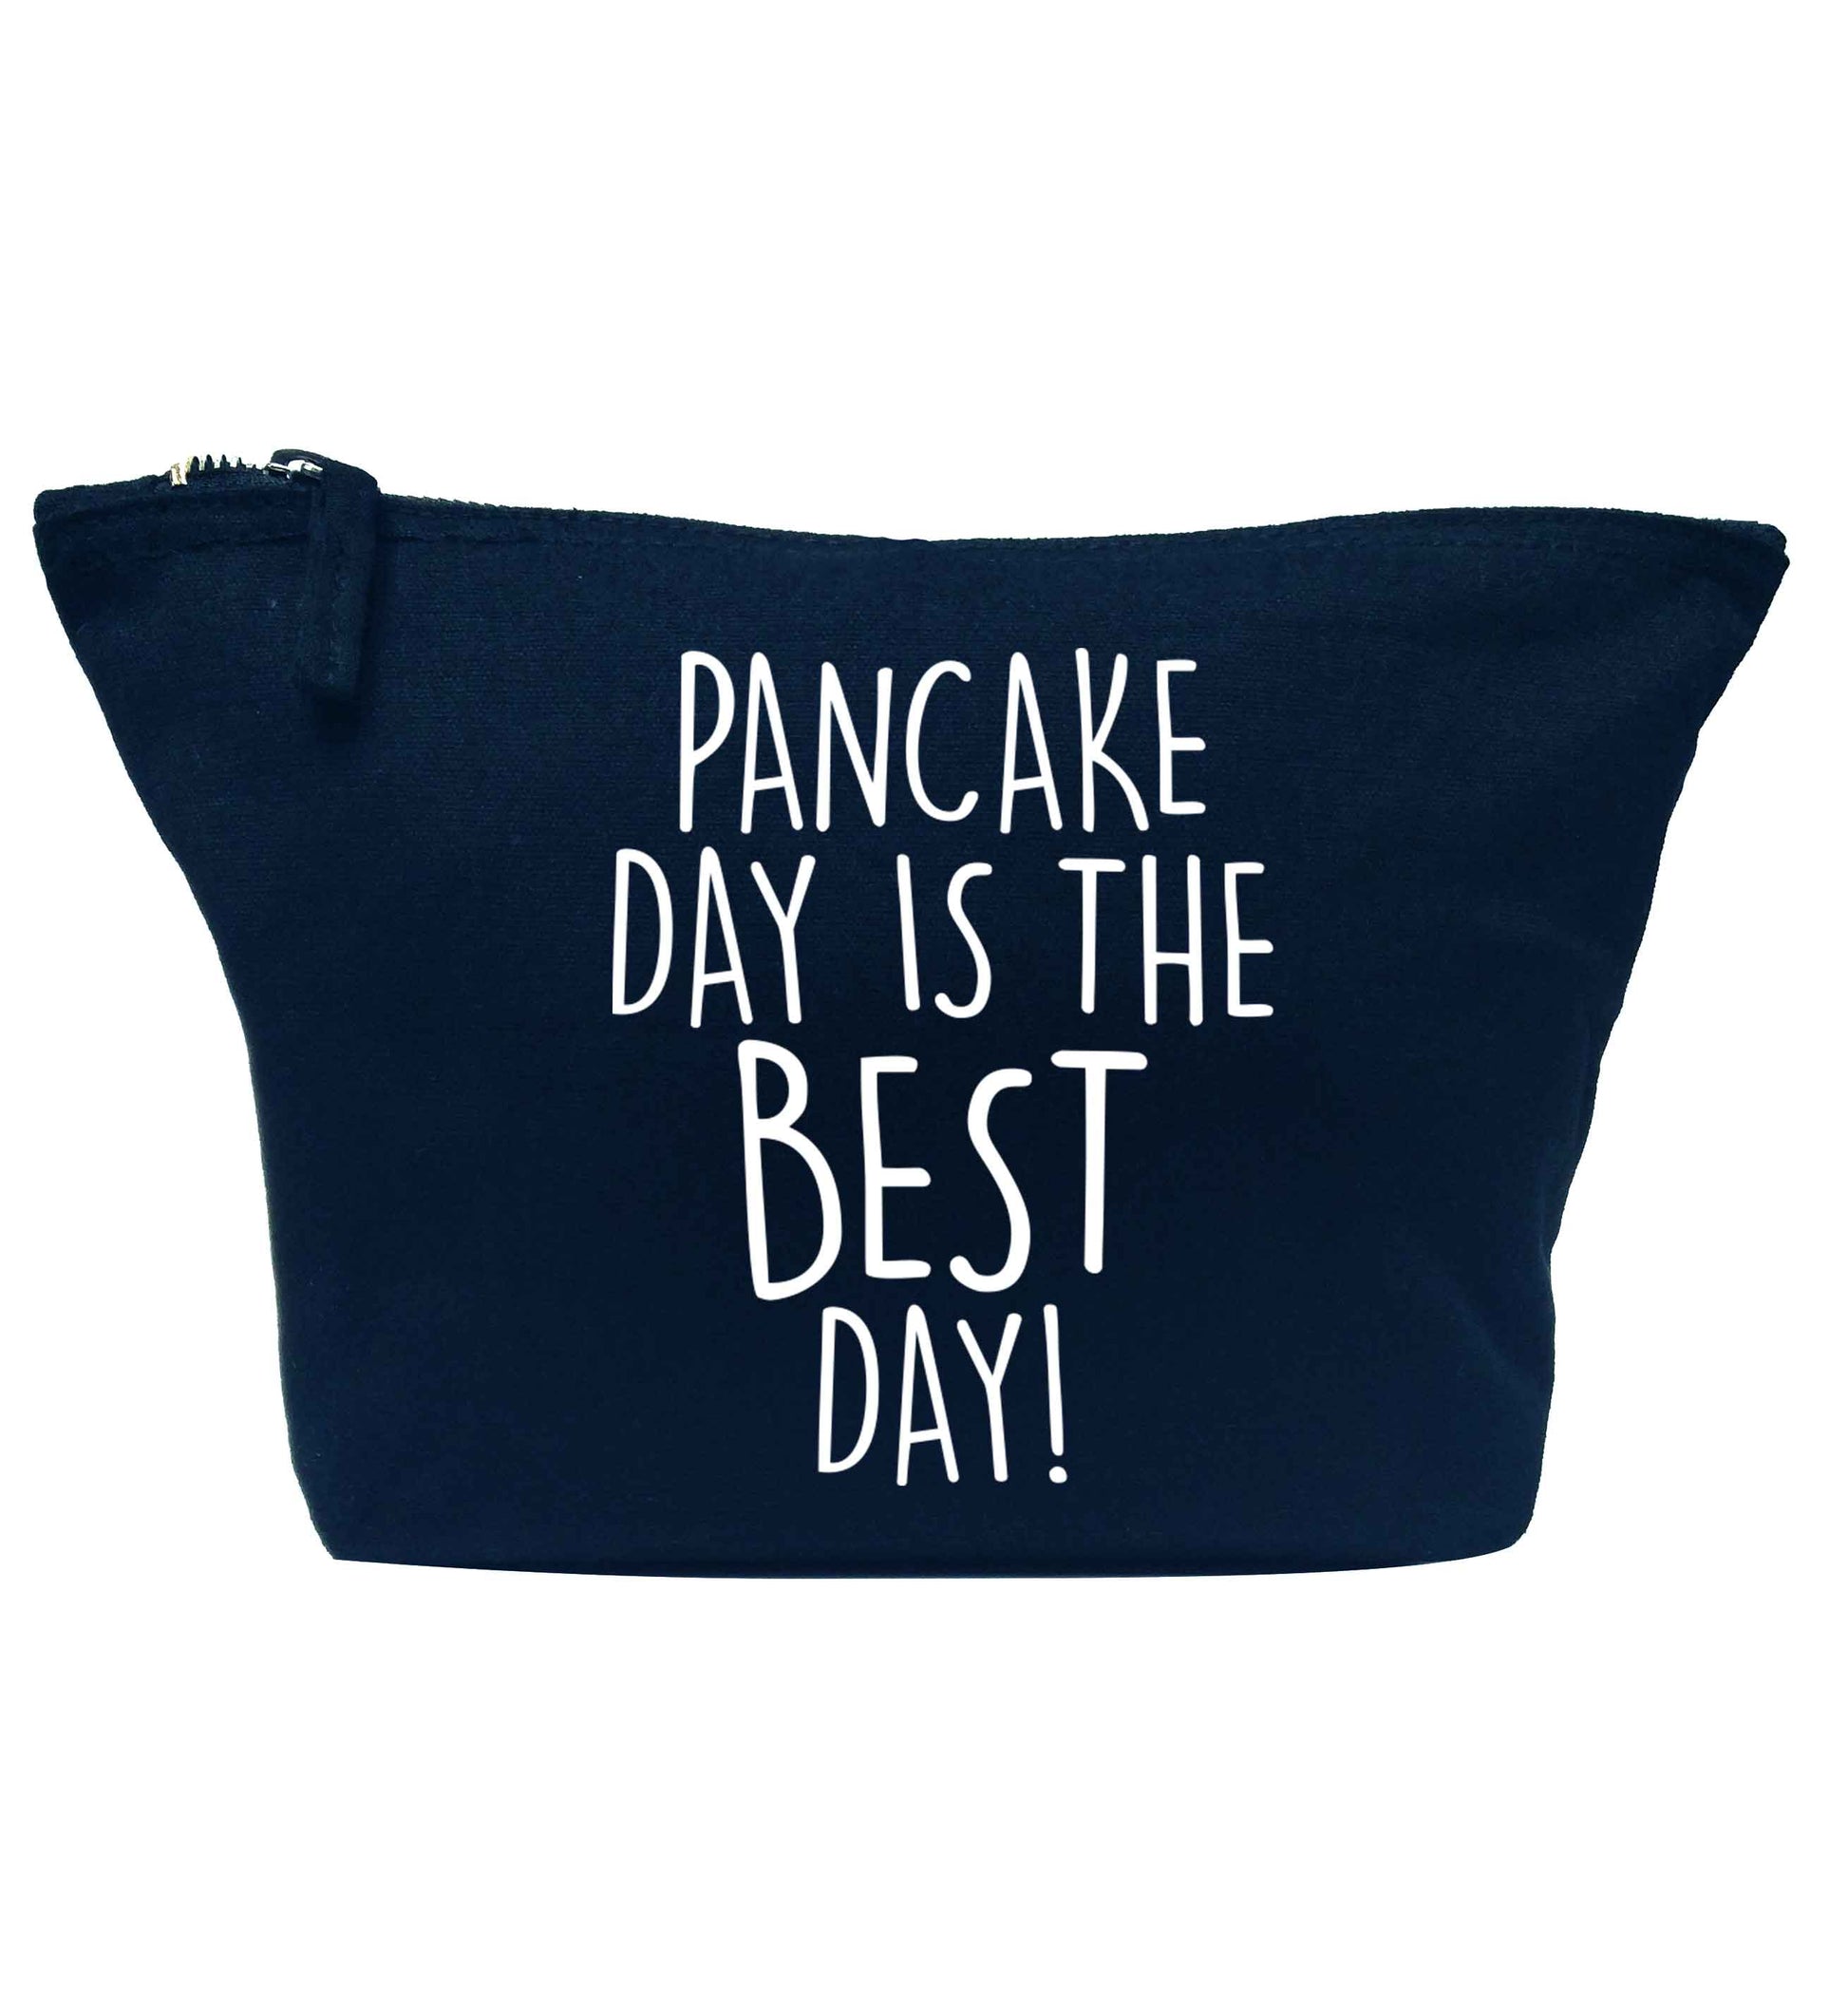 Pancake day is the best day navy makeup bag